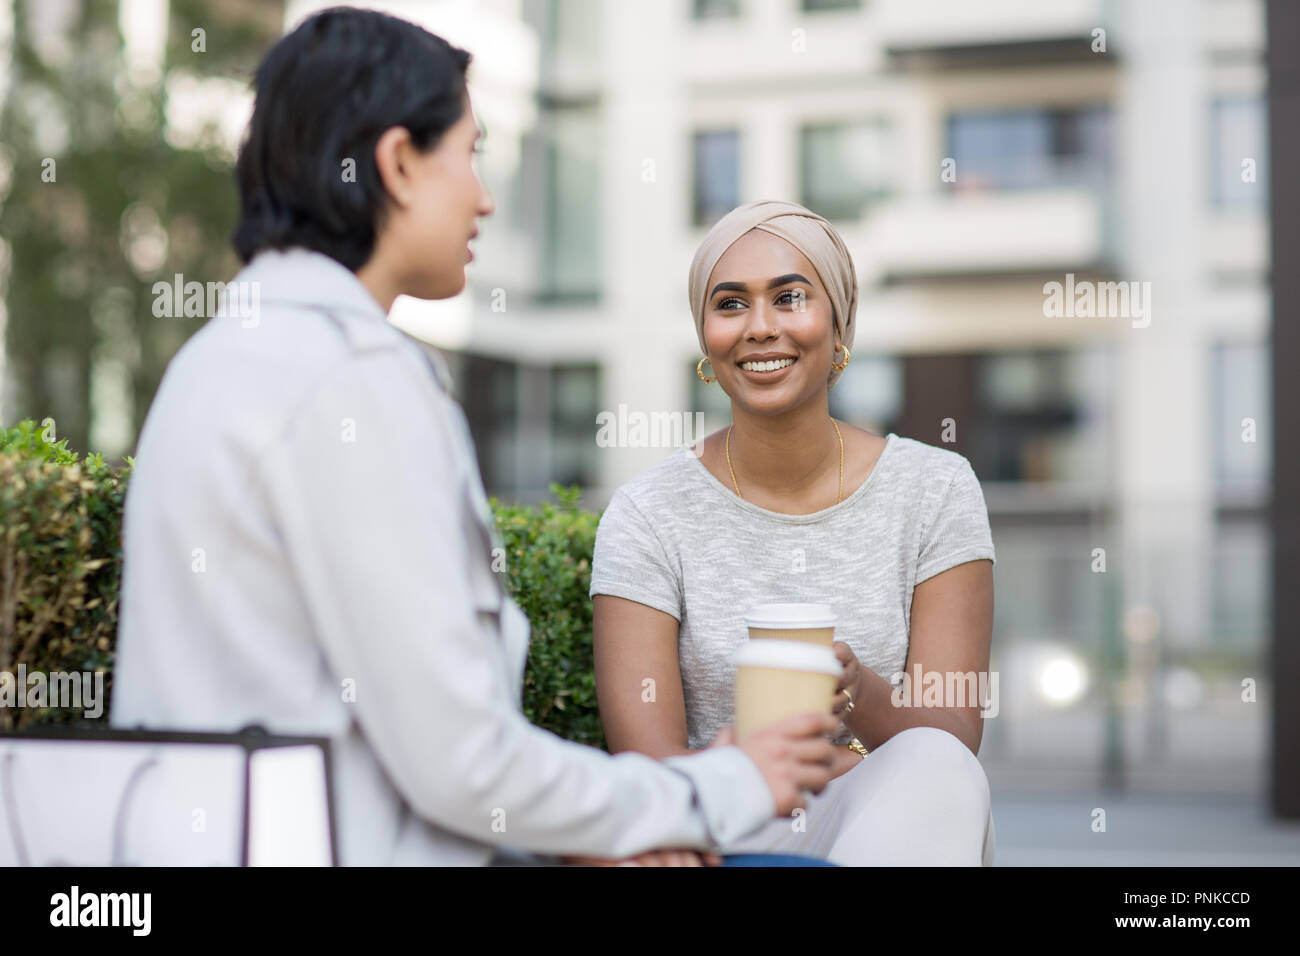 Female Muslim friends having coffee together outdoors Stock Photo